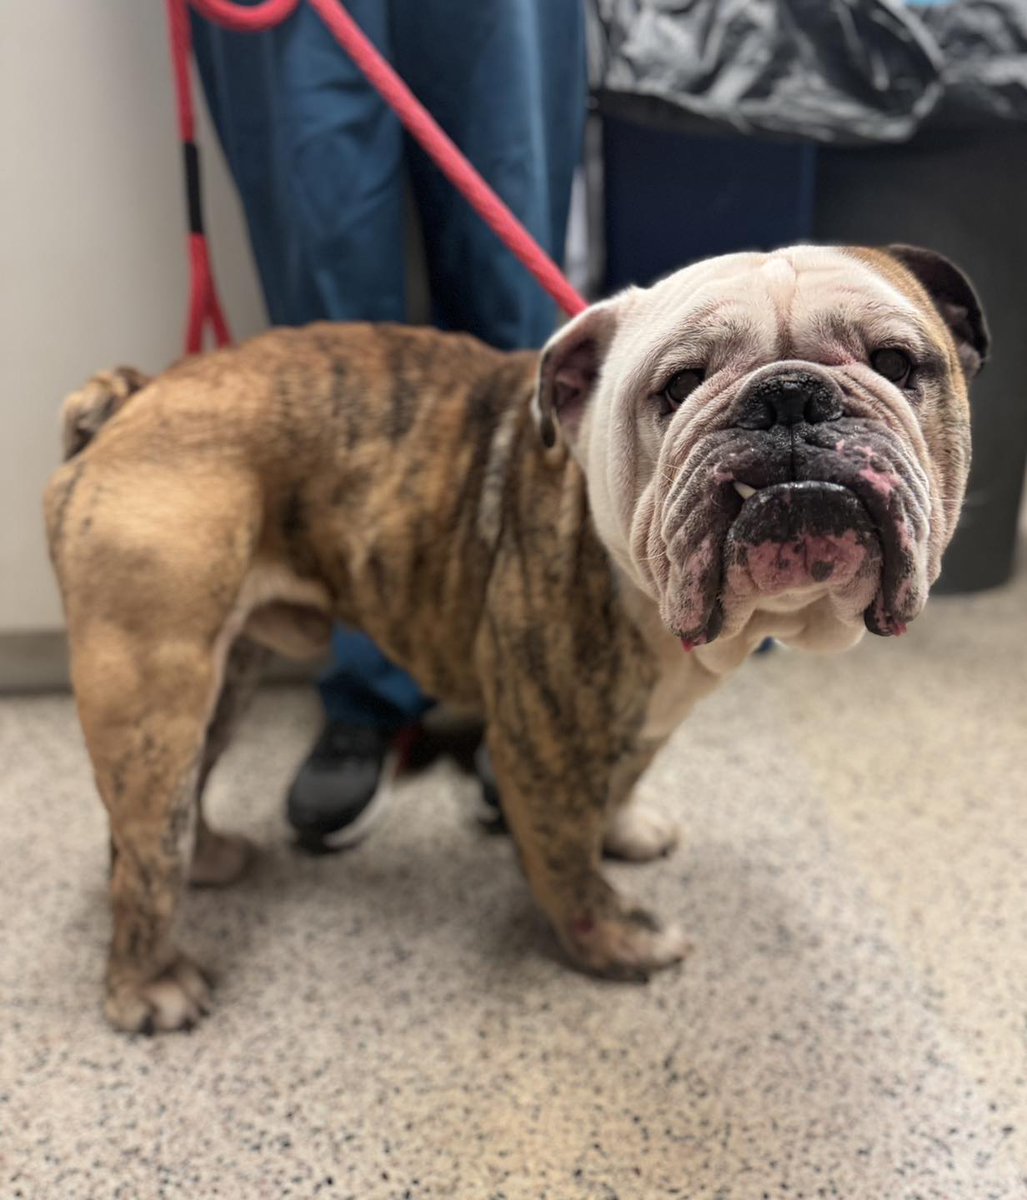 Do you recognize this dog? Heineken was found outside of our shelter on Erie Ave today. He is an adult male Bulldog. If you are missing him, or know who his owners are, please contact the shelter.